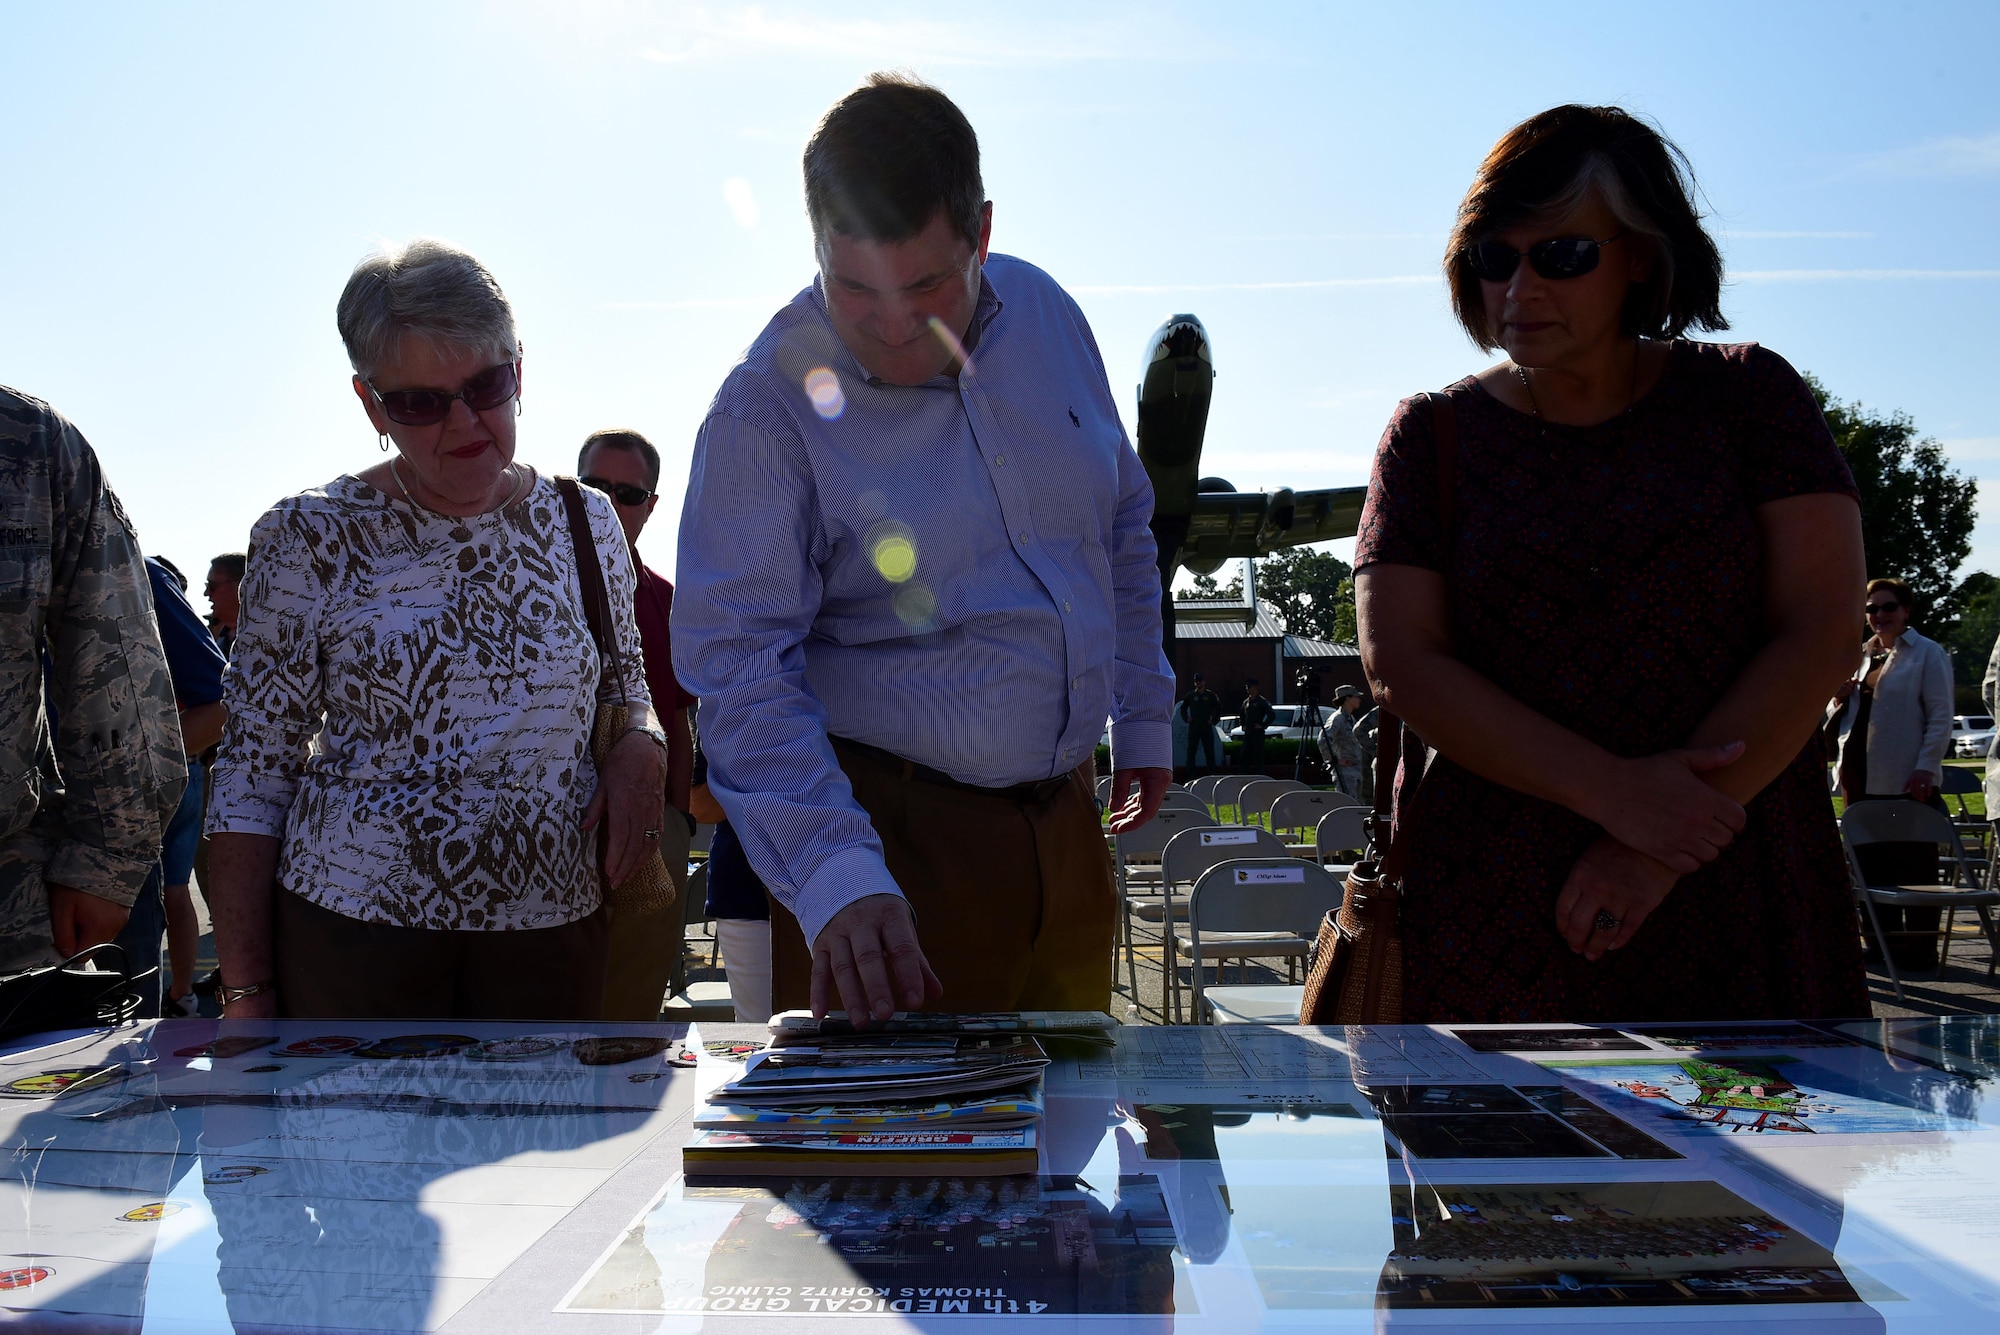 Members from Team Seymour and Goldsboro look at new items to be added to the new time capsule, Sept. 15, 2017, at Seymour Johnson Air Force Base, North Carolina. The contents from the 1992 capsule will be in the new capsule, along with digitized copies of some items too fragile to be buried for another 25 years. (U.S. Air Force photo by Airman 1st Class Kenneth Boyton)